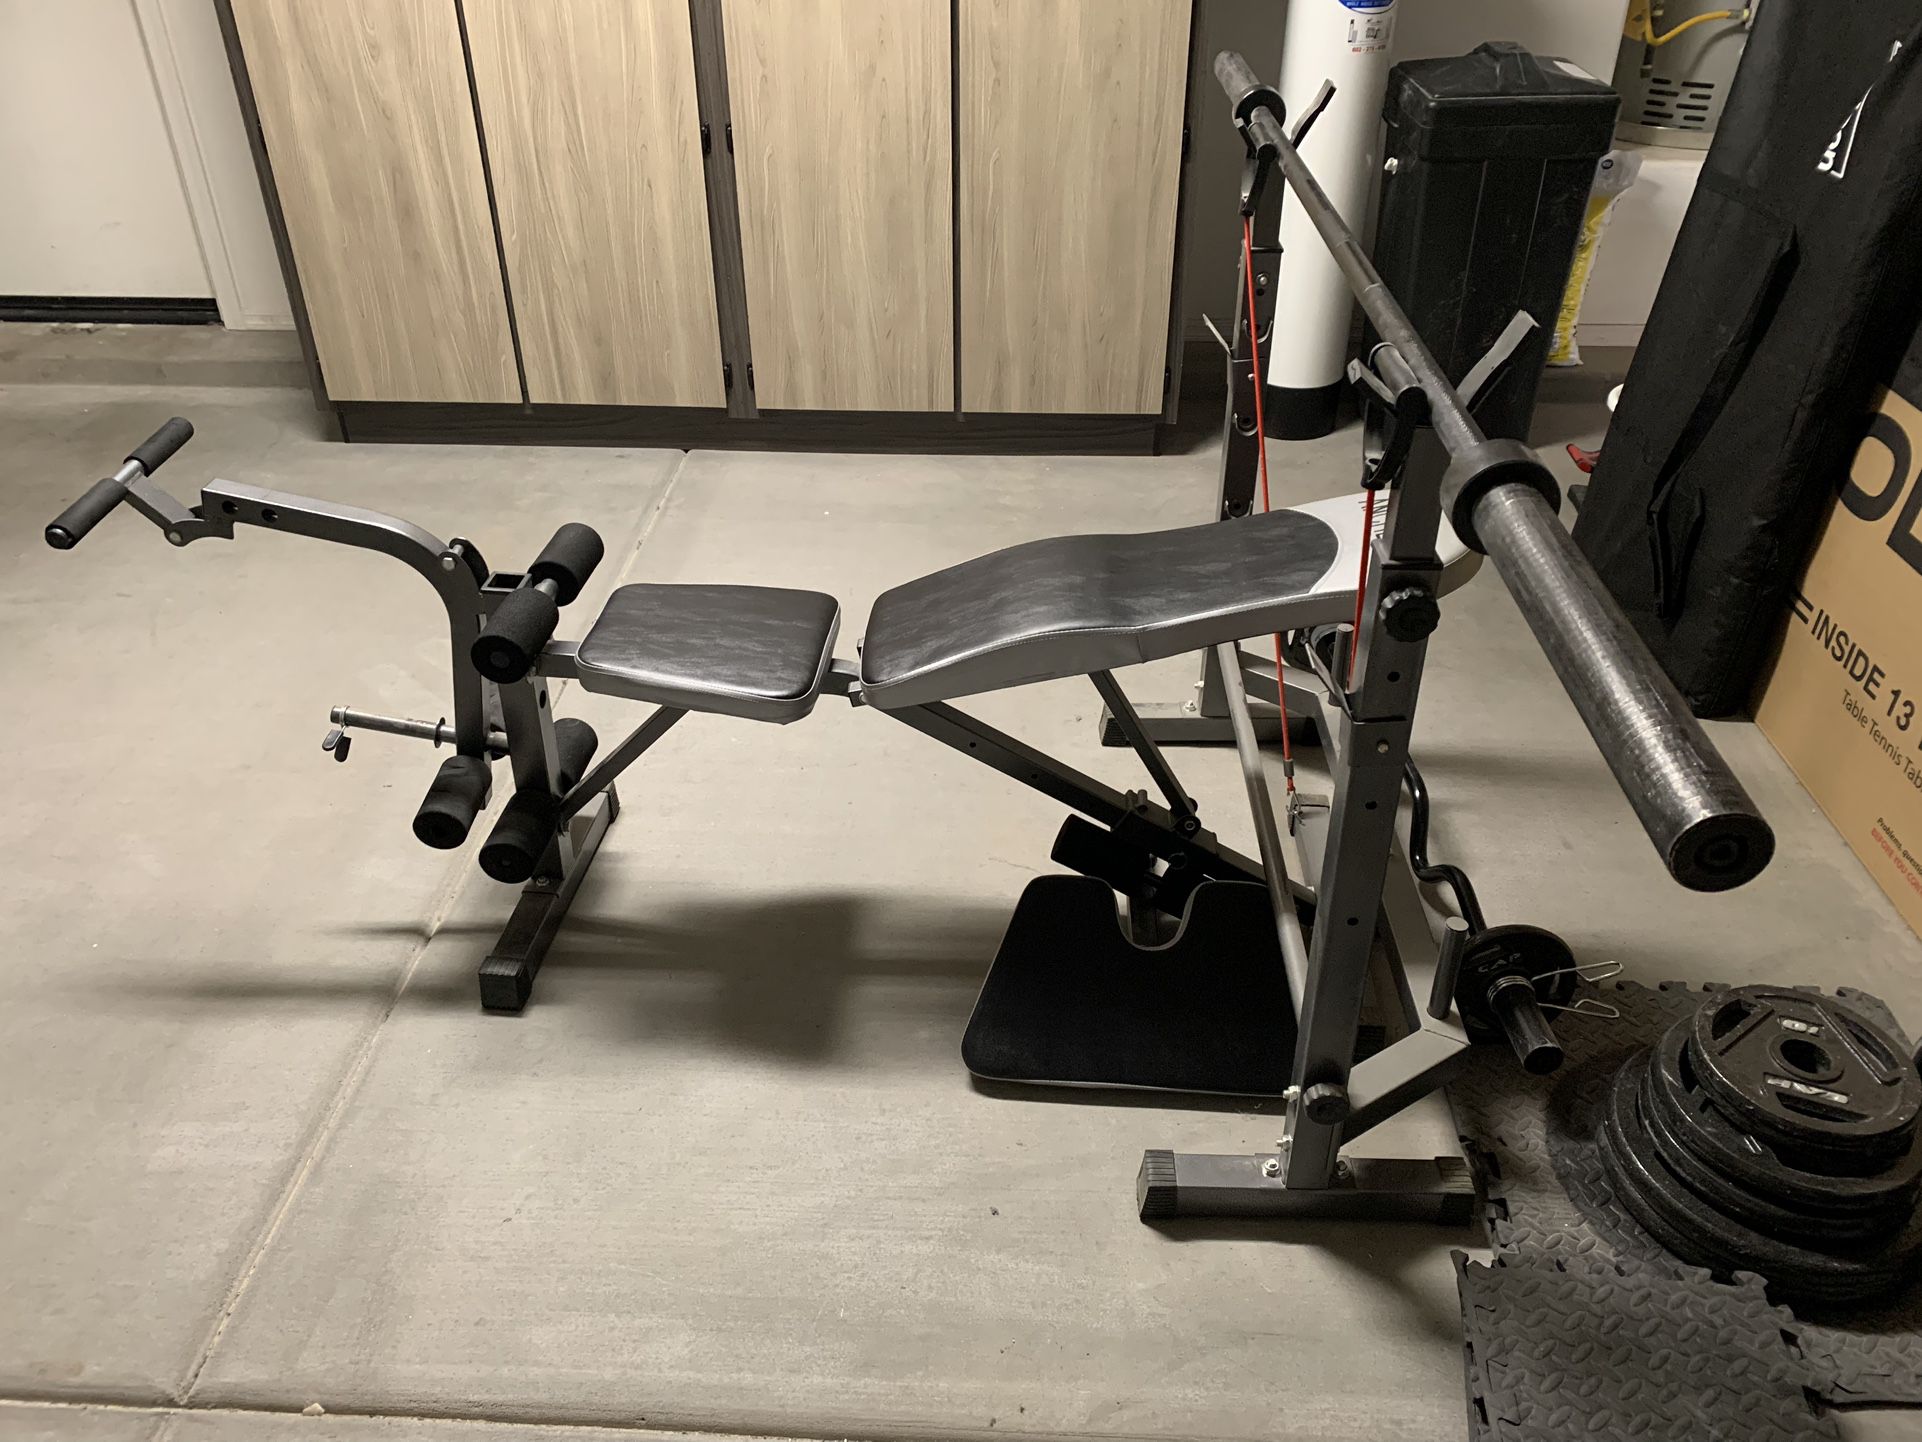 Weight Bench With Weight Bars &Weights $200